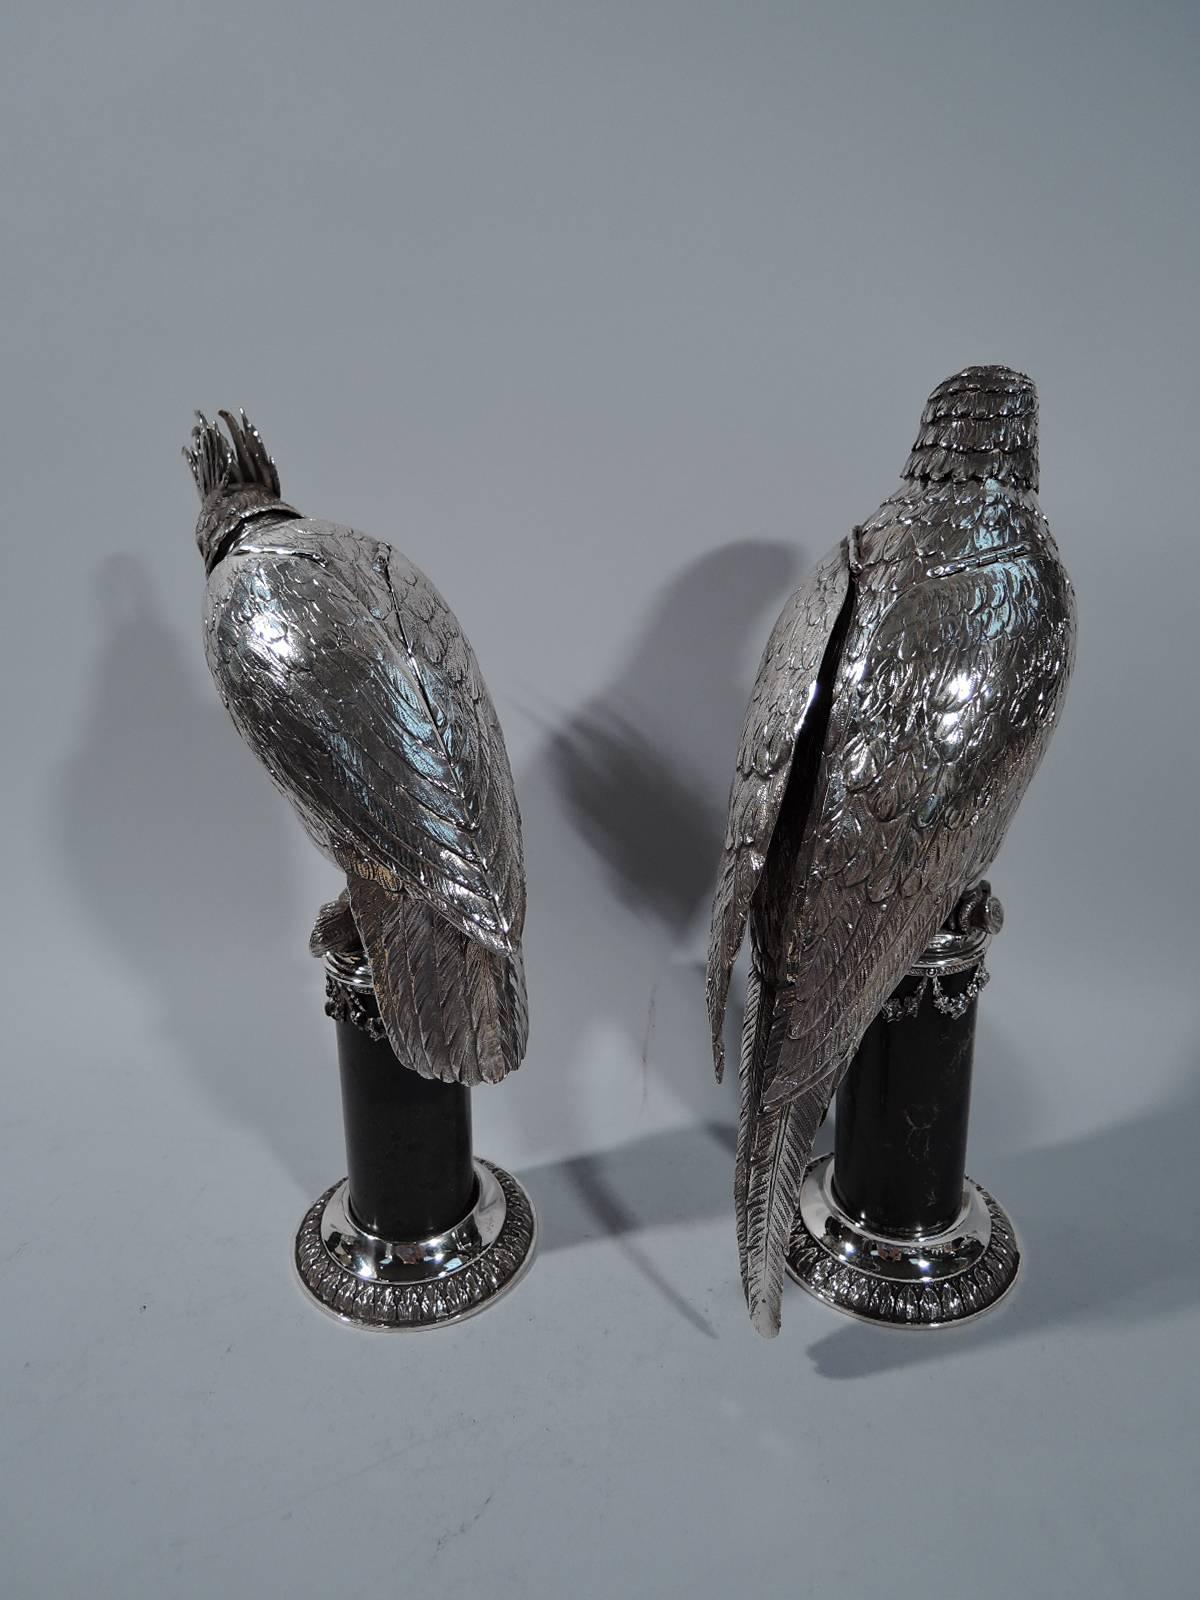 Pair of German silver parrot spice boxes, circa 1890. Each: Full downy body with hinged wings and scaly talons gripping a wood perch. Head detachable. A male and female couple. The male has a fancy crown and looks down. The female is on alert with